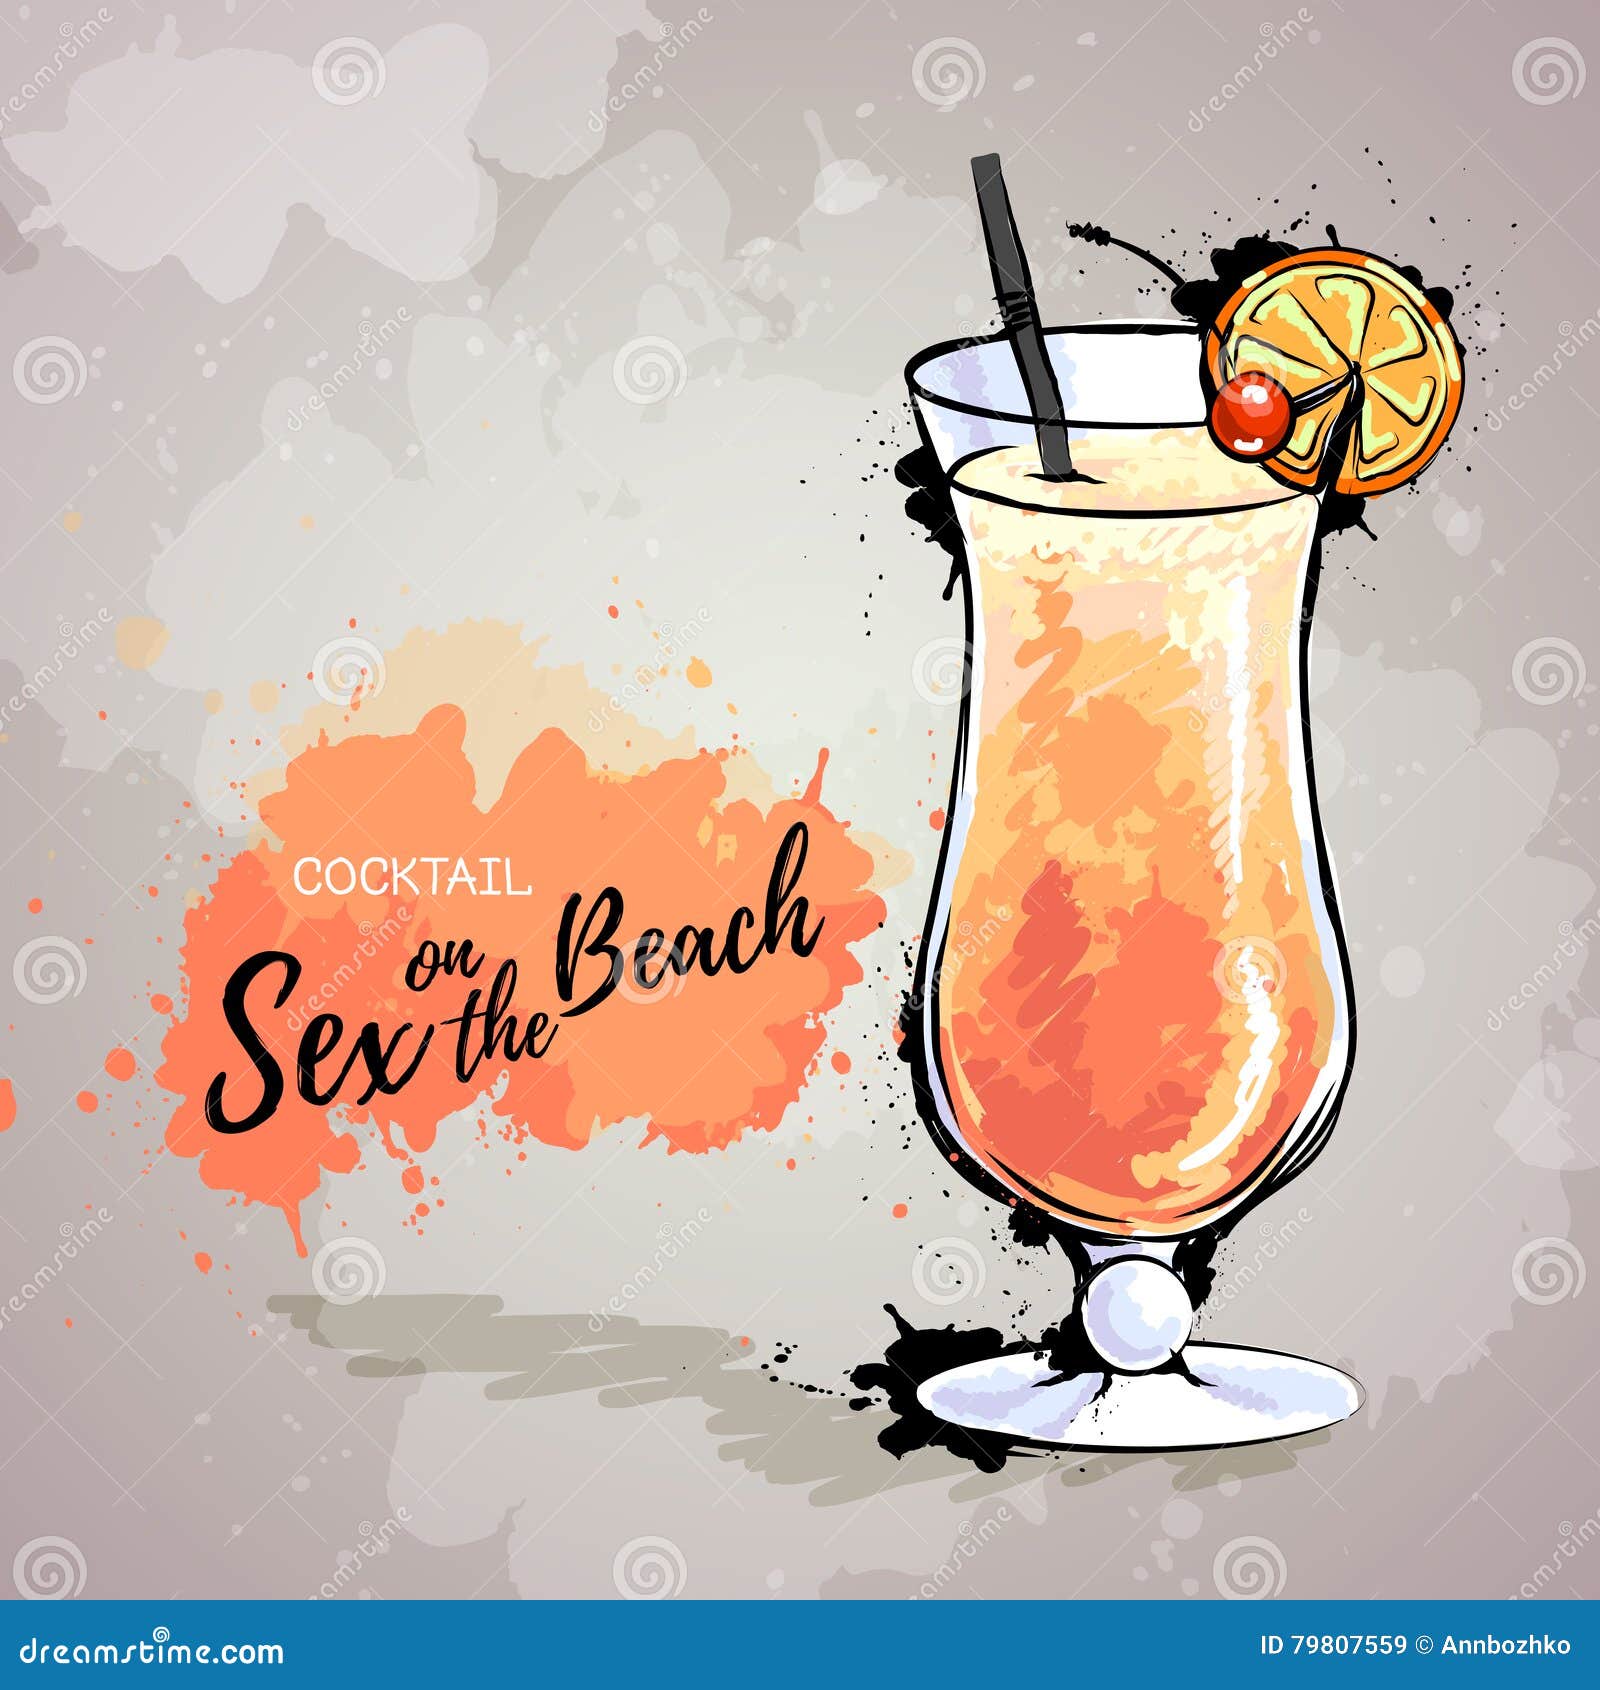 Hand Drawn Illustration Of Cocktail Sex On The Beach